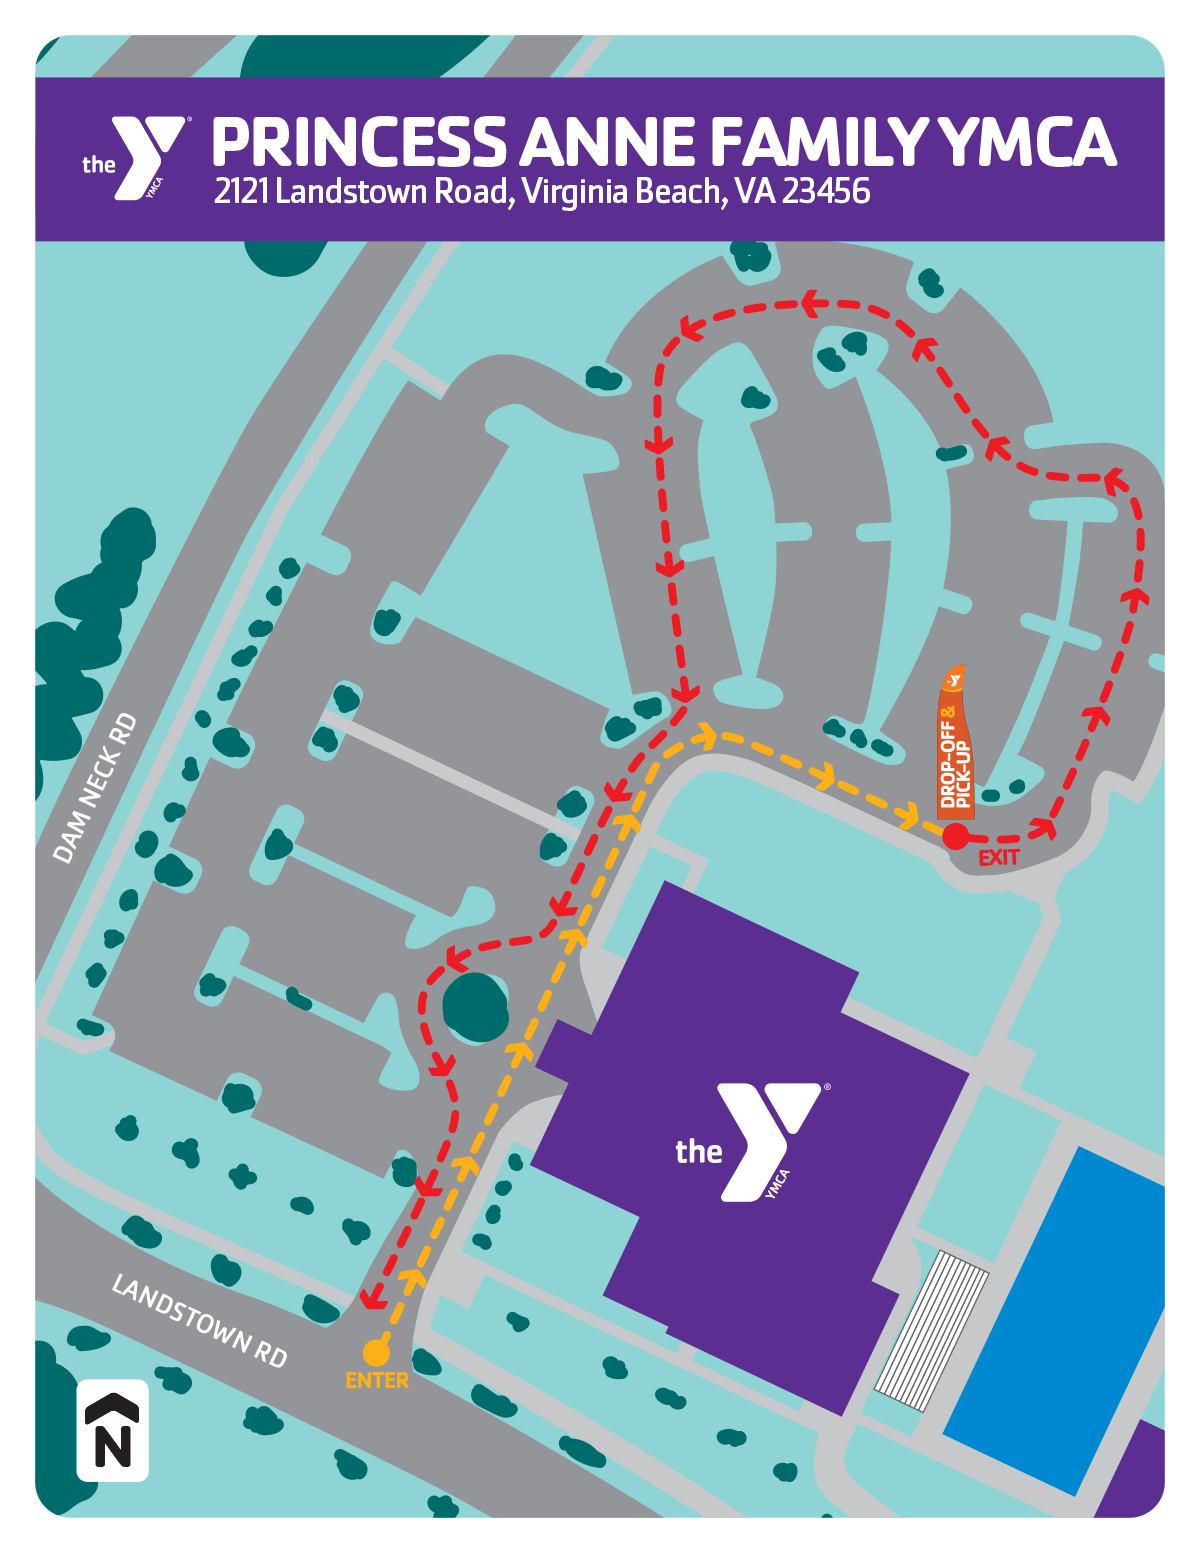 Summer camp drop-off & pick-up locations for the Princess Anne Family YMCA